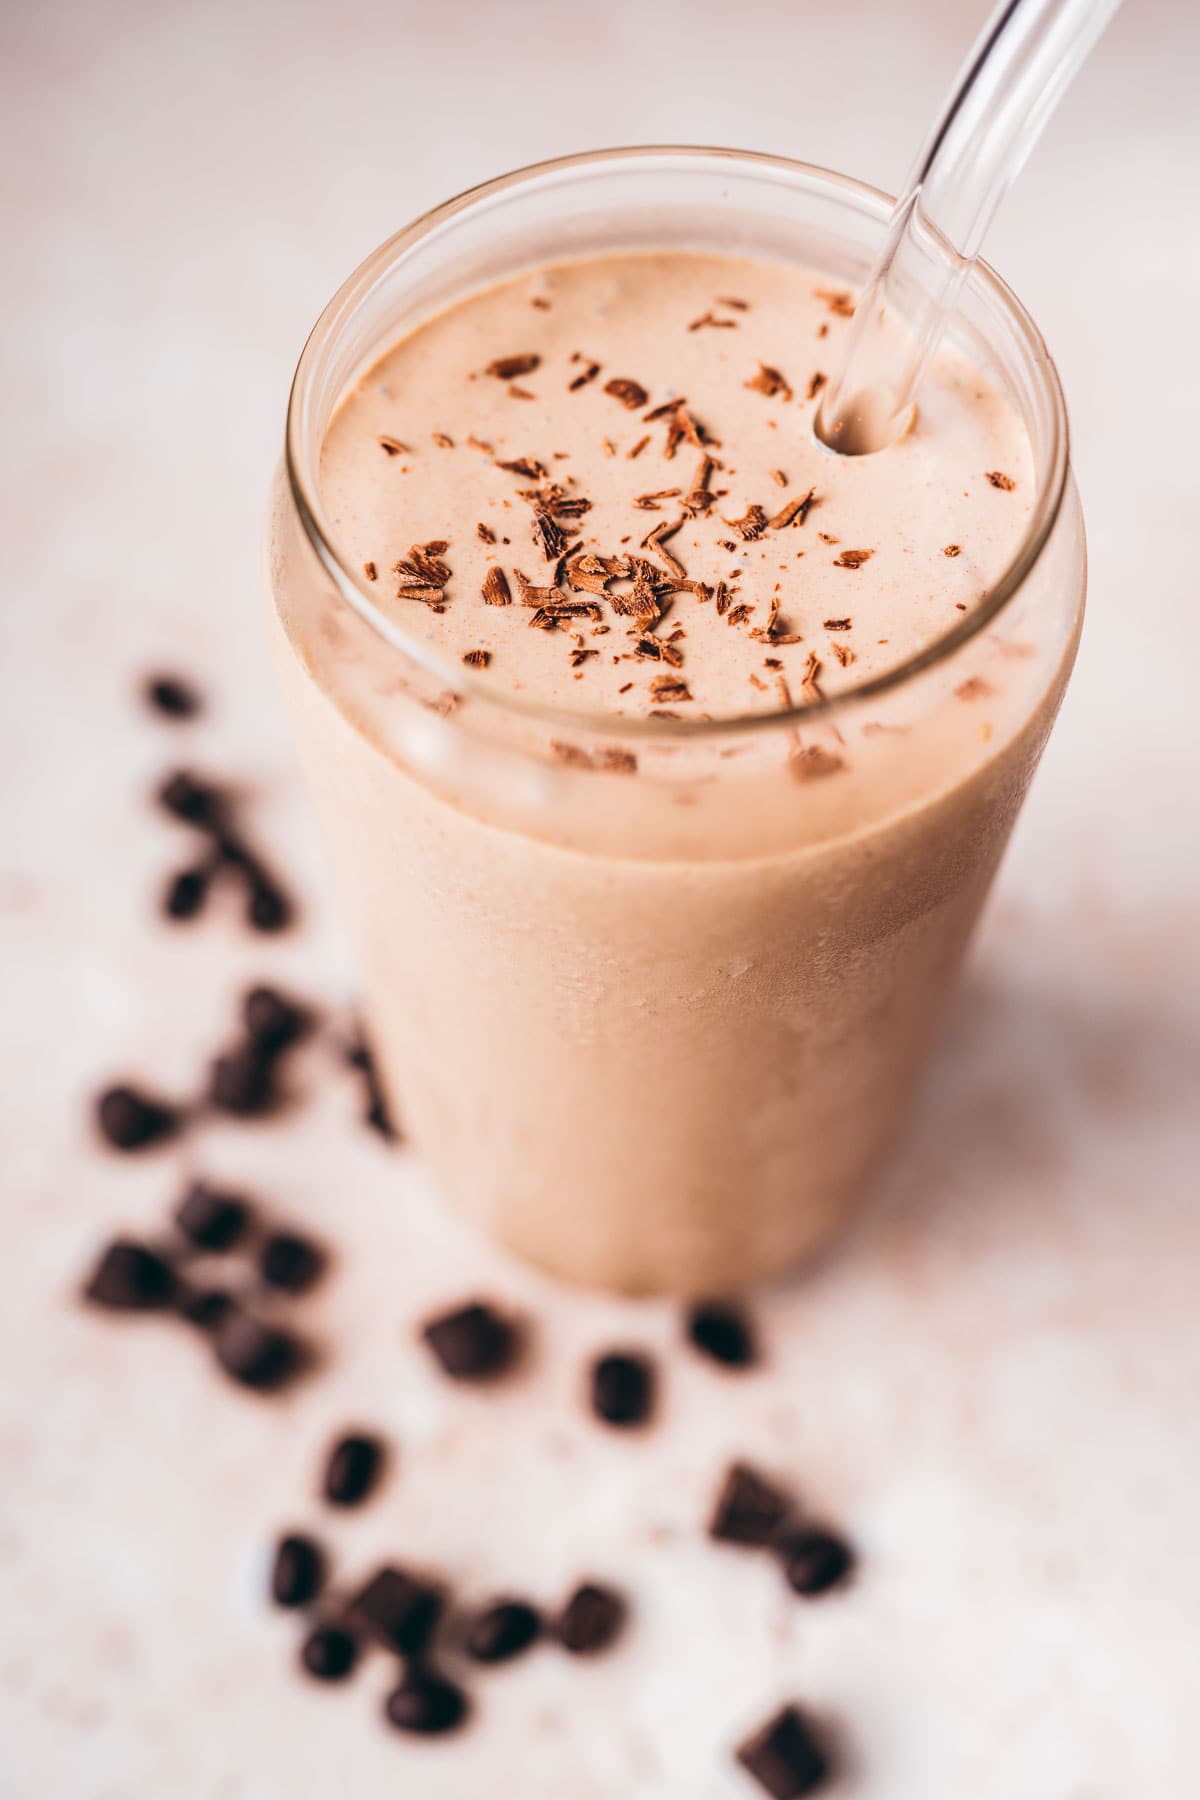 A tall clear glass filled with a homemade coffee milk shake garnished with grated chocolate.